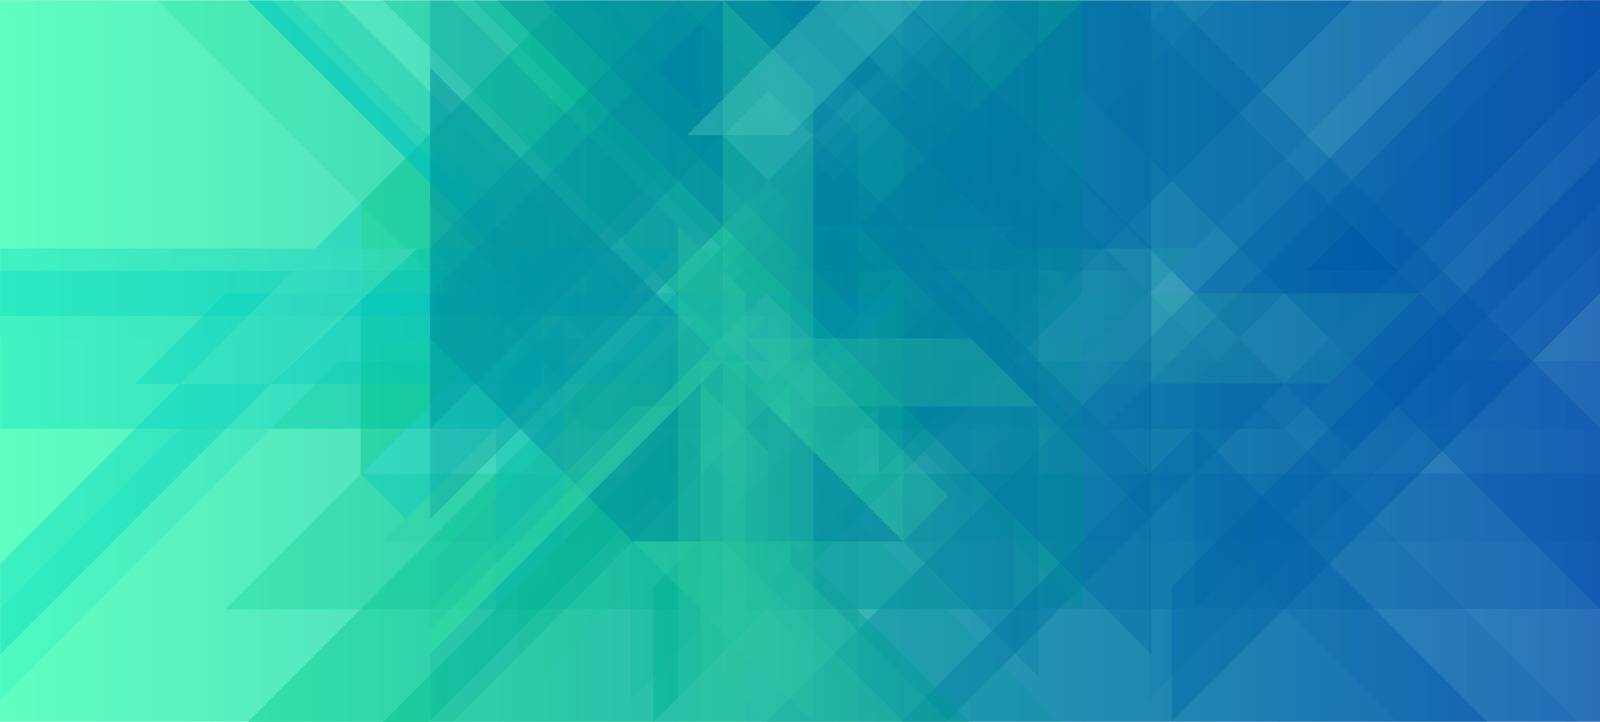 Abstract geometric vector banner with triangular pattern by SlayCer